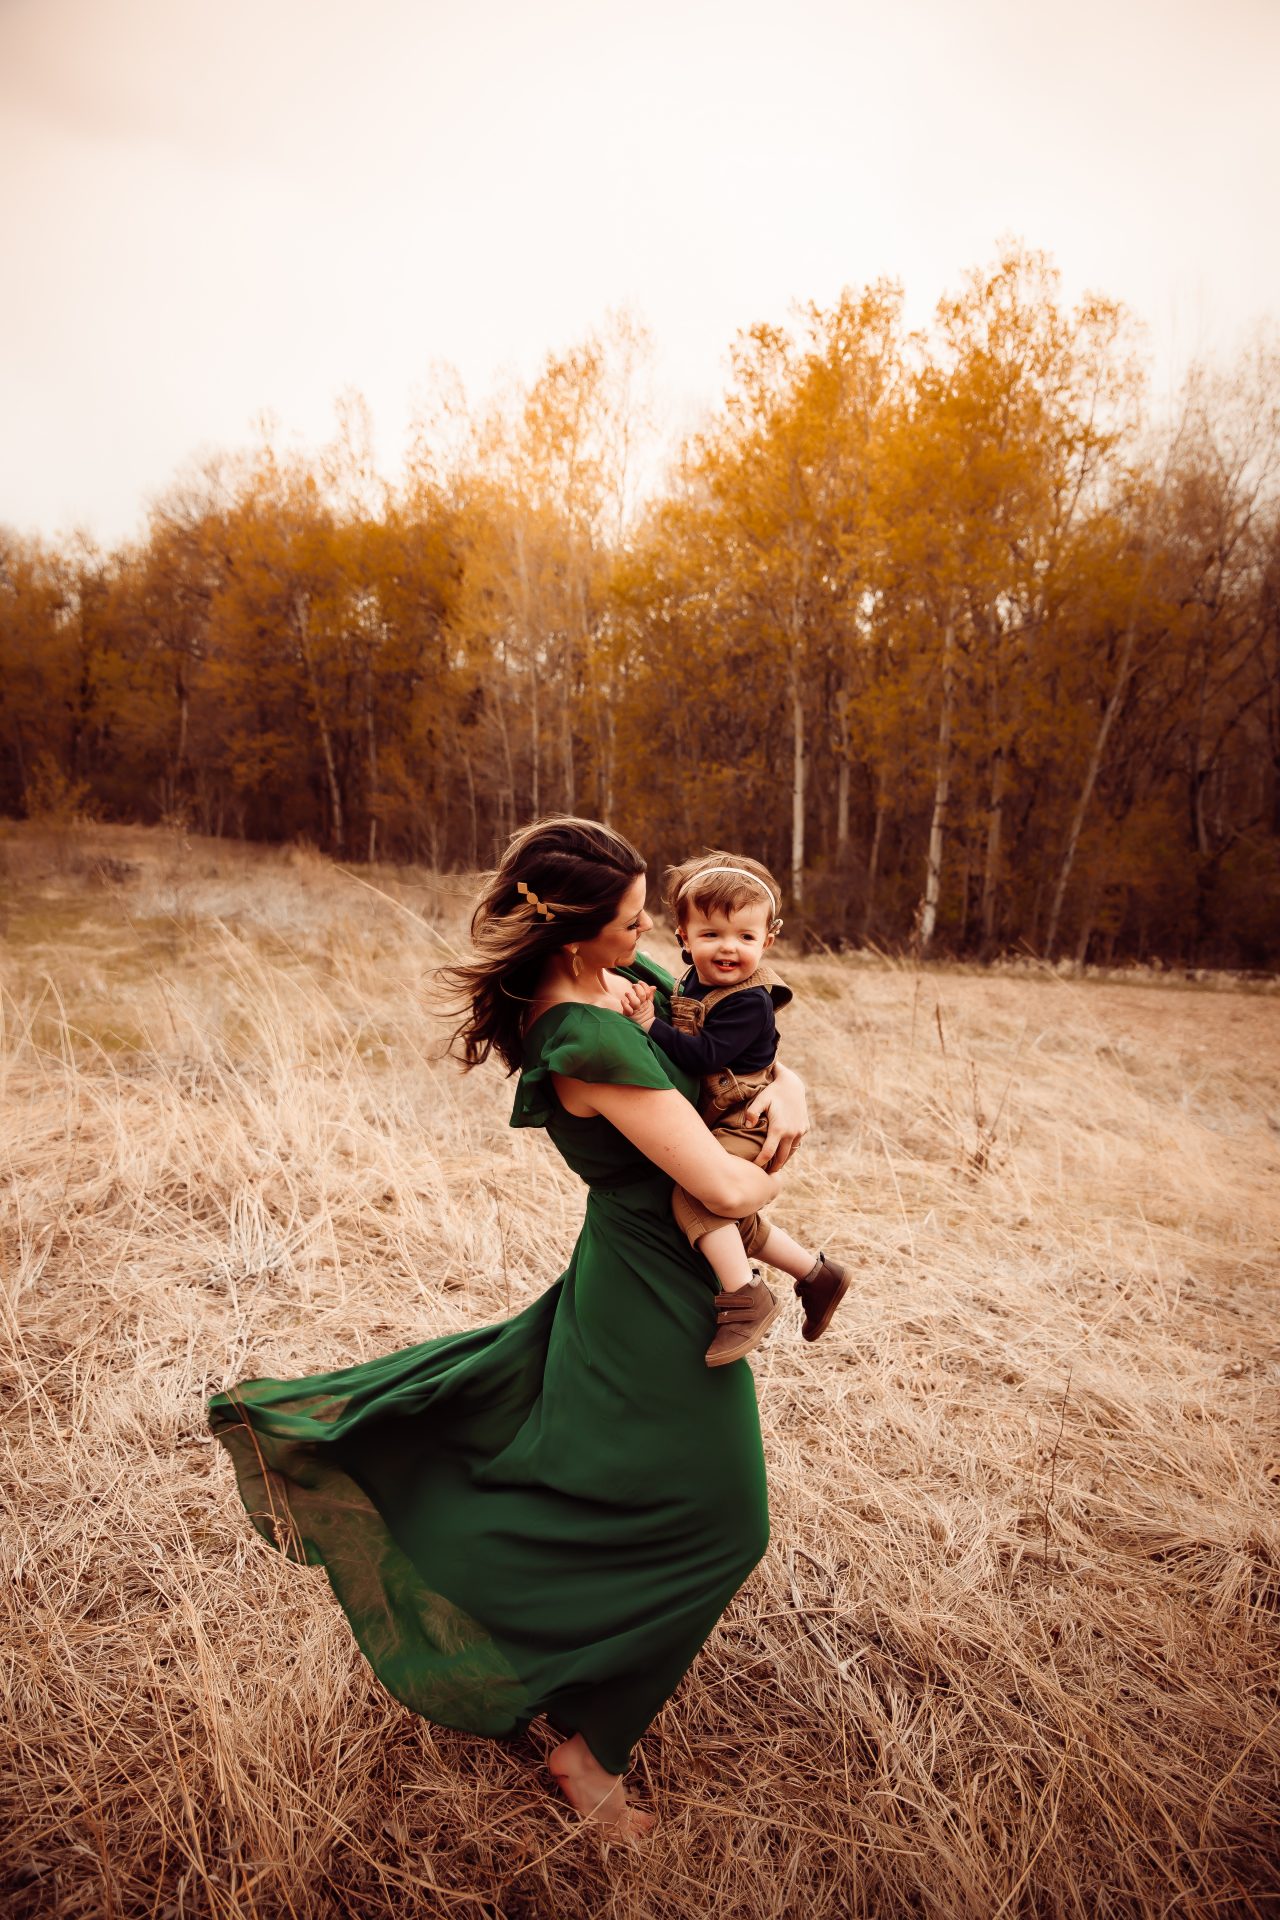 A joyful moment captured in the warm glow of sunset—mother and child, raising a deaf child, sharing a tender embrace amidst a rustic autumnal landscape that celebrates inclusion.